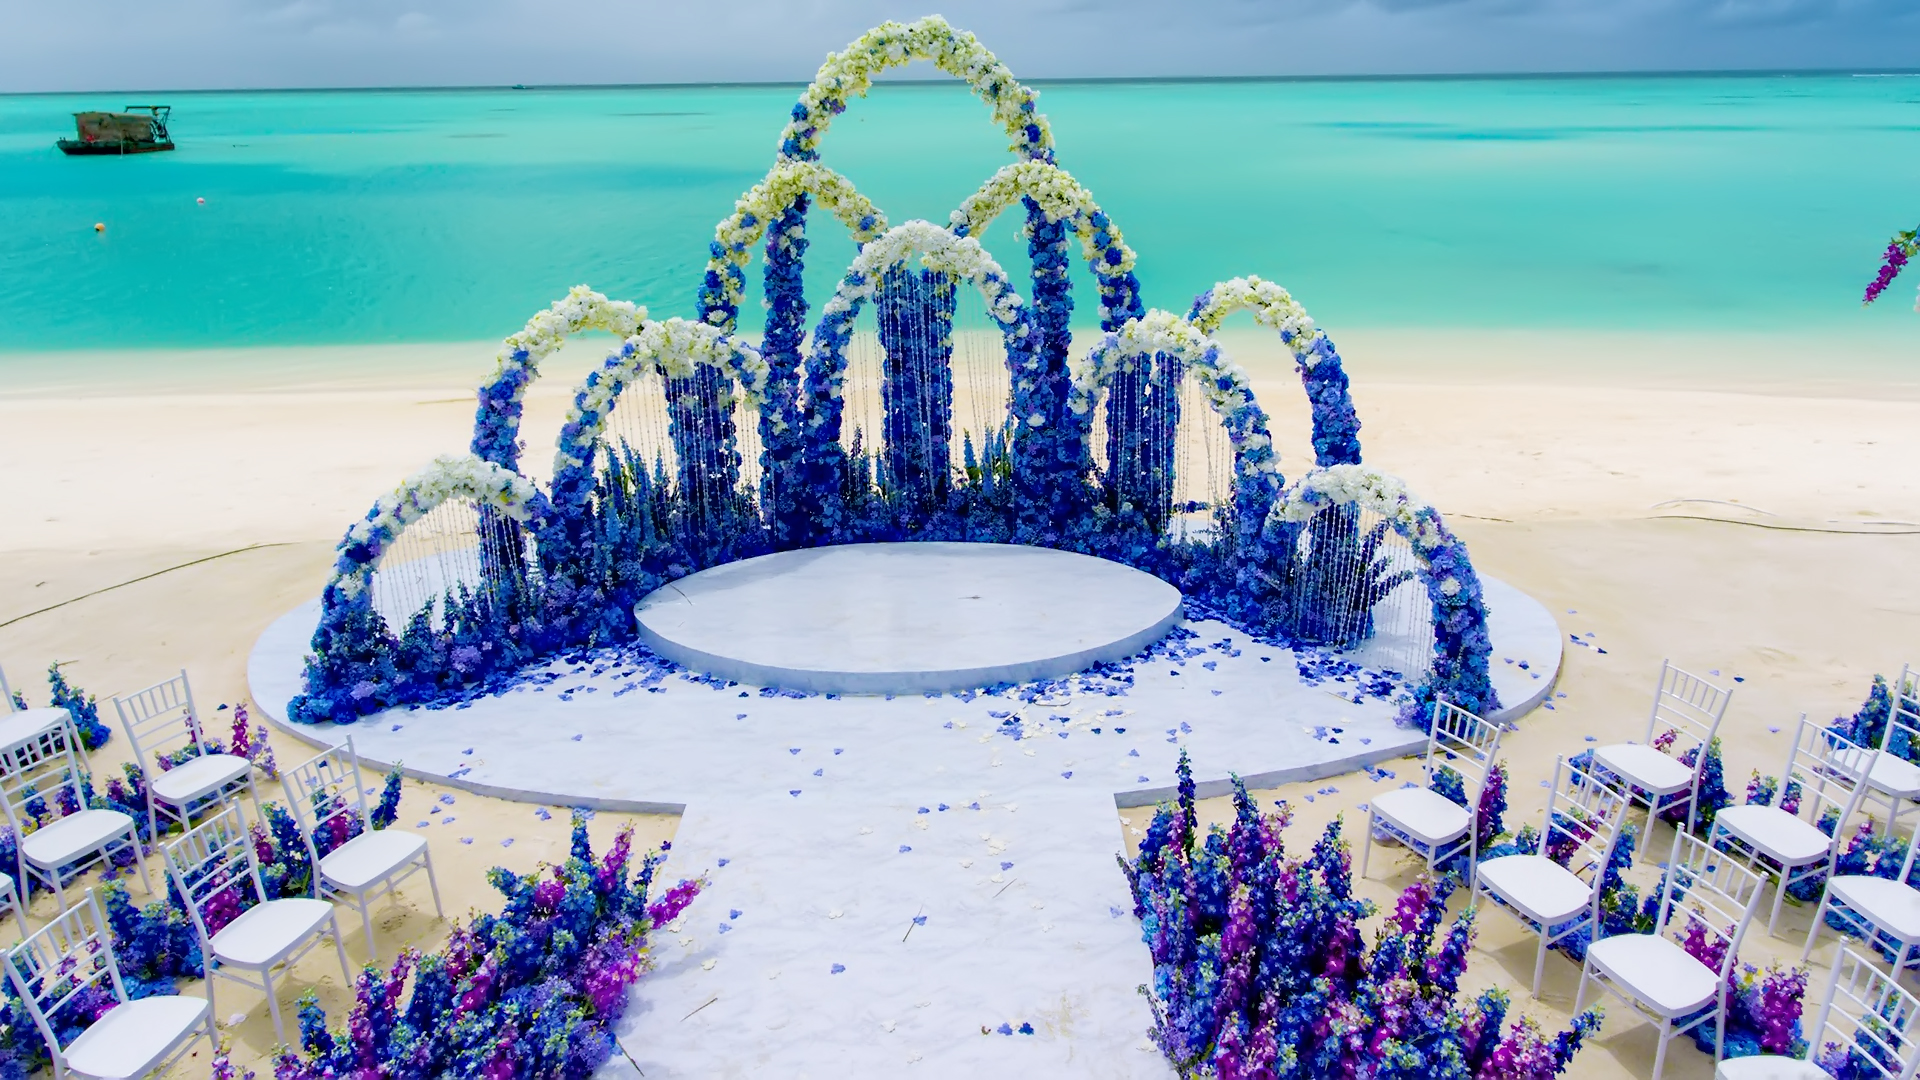 Destination Wedding: Consider This Pros And Cons Before Making The Ultimate Decision